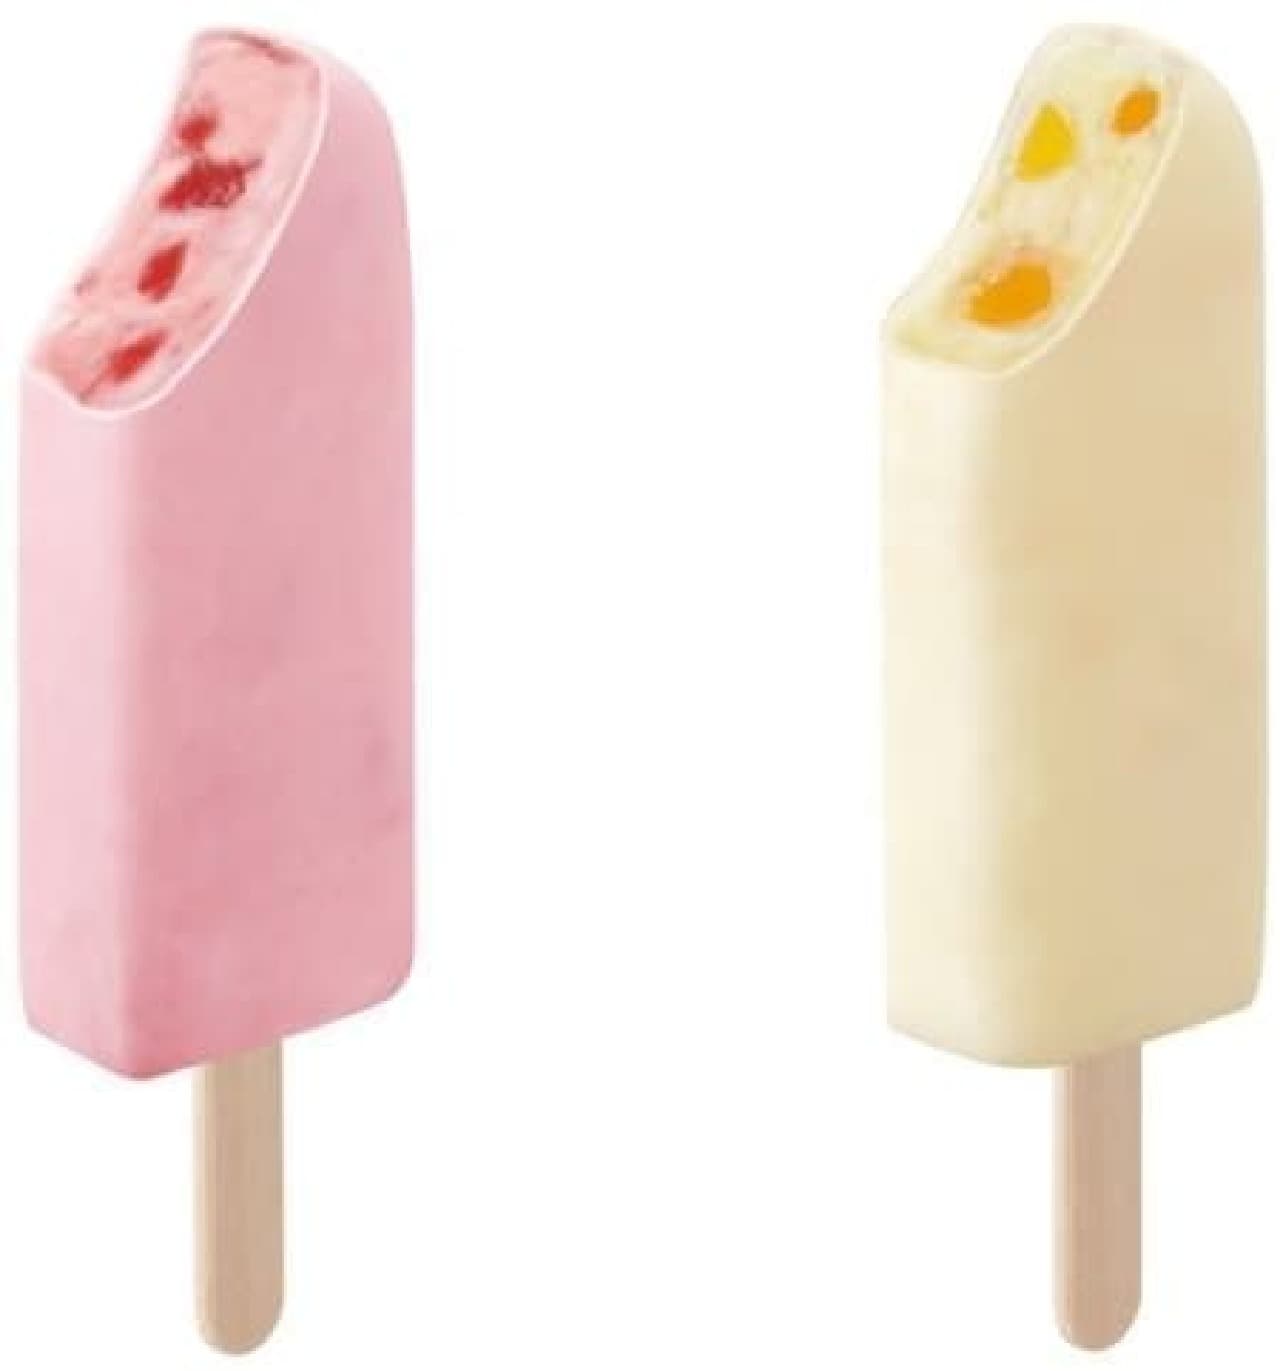 Popular flavors of strawberry (left) and mixed peach (right)